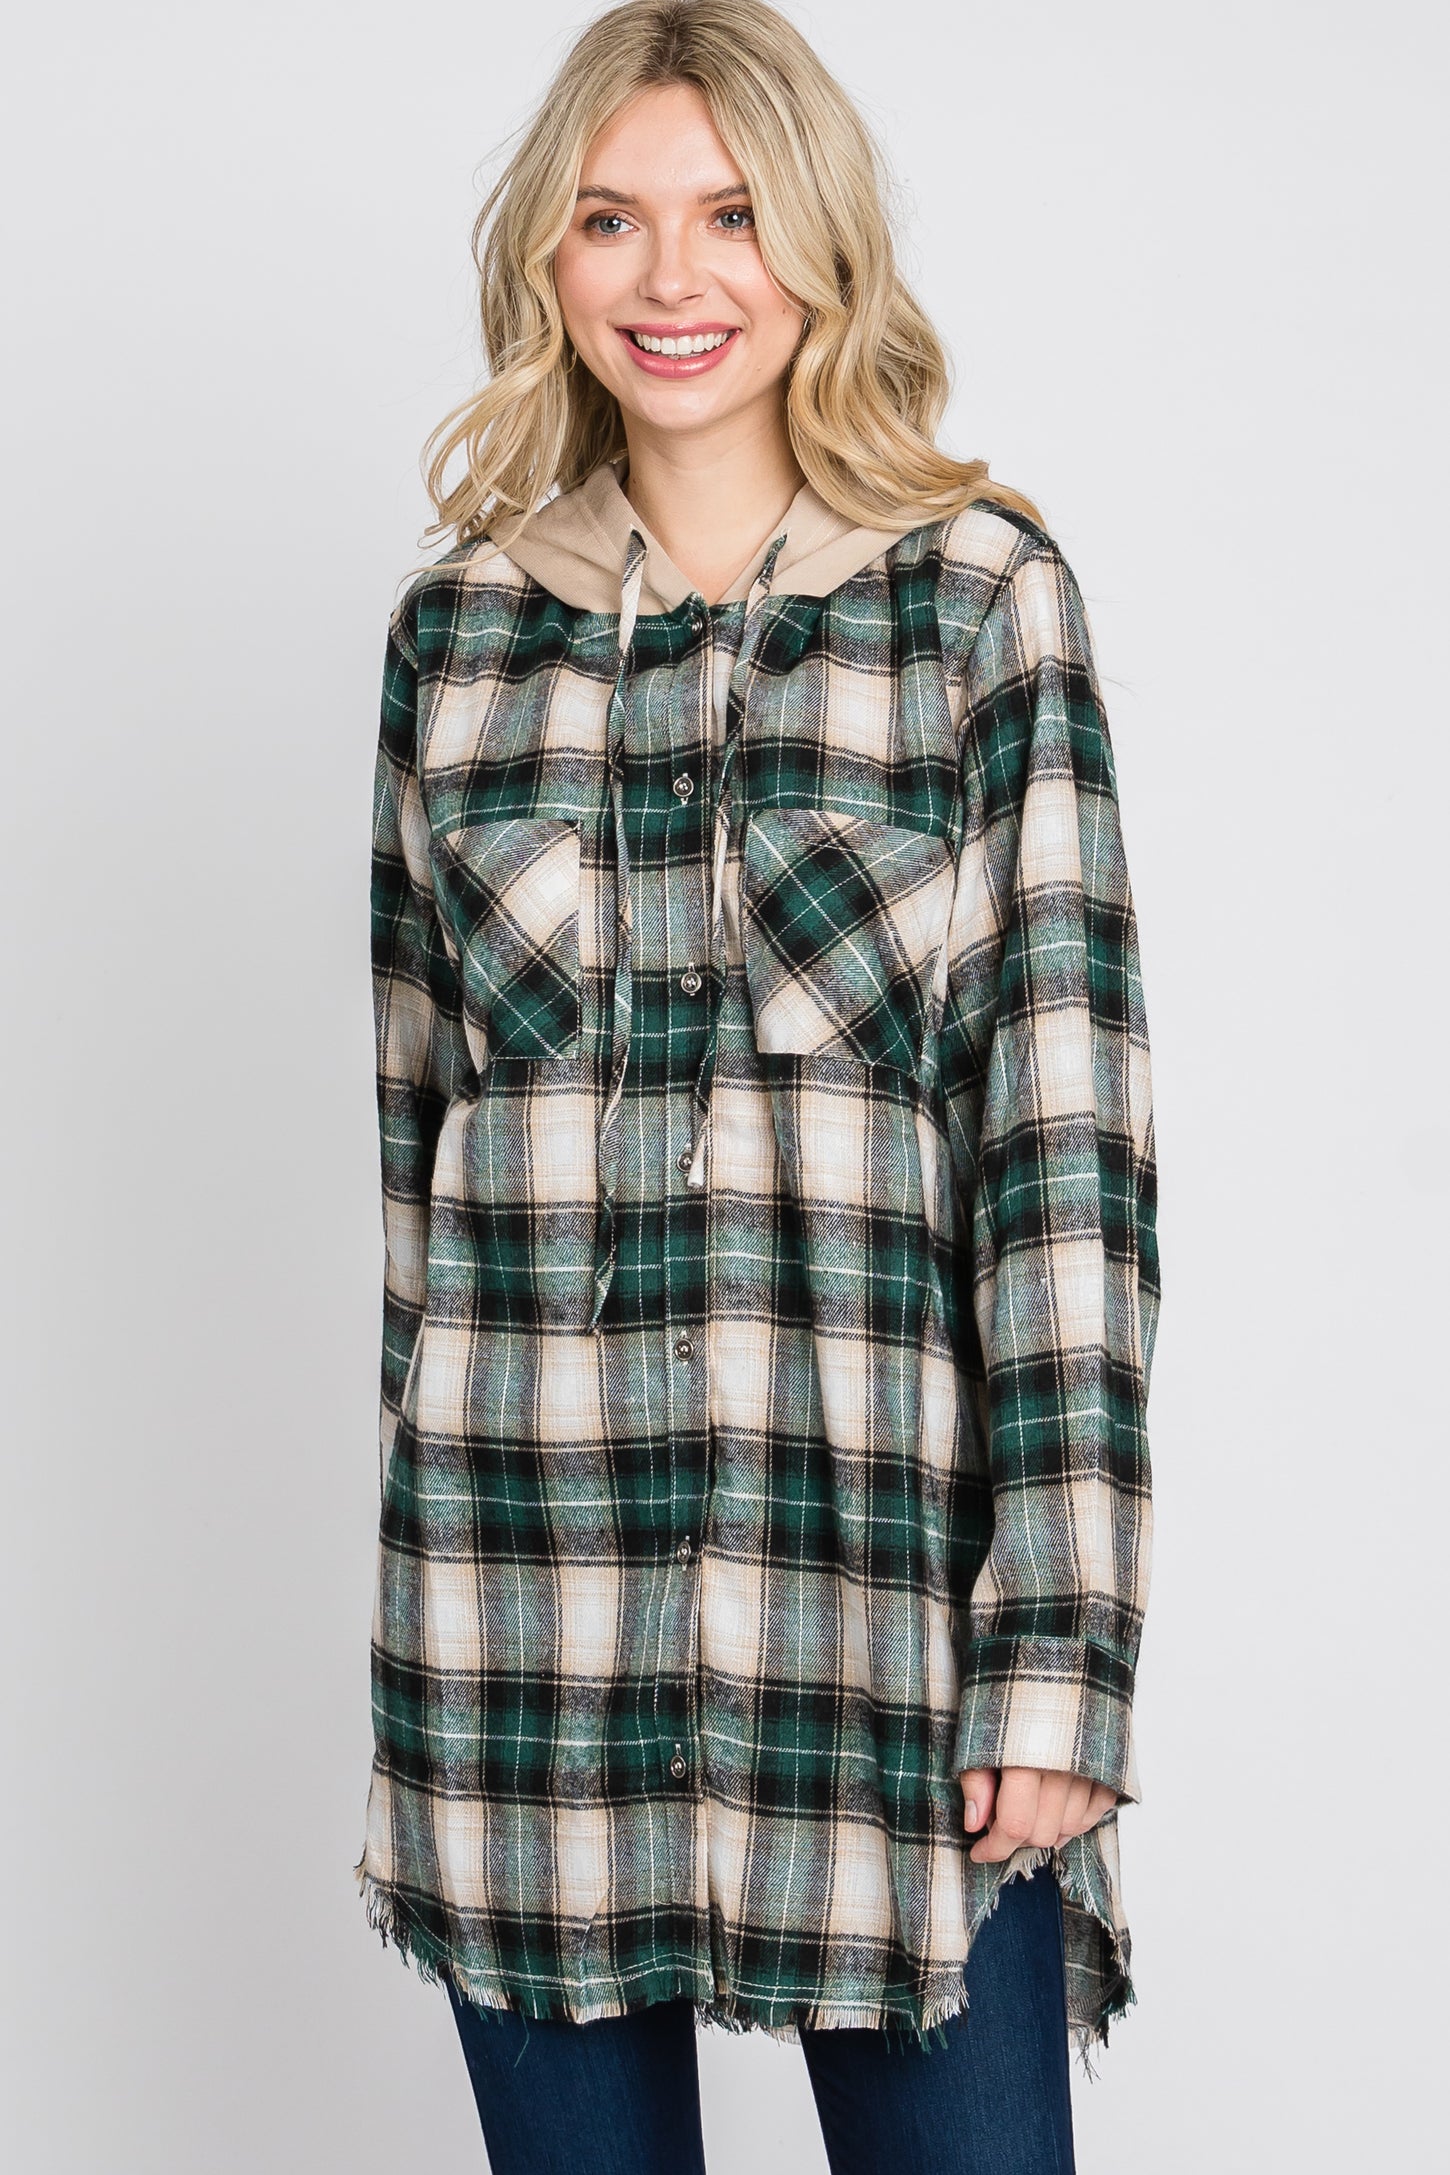 Green Plaid Button Front Fringe Hem Hooded Top– PinkBlush